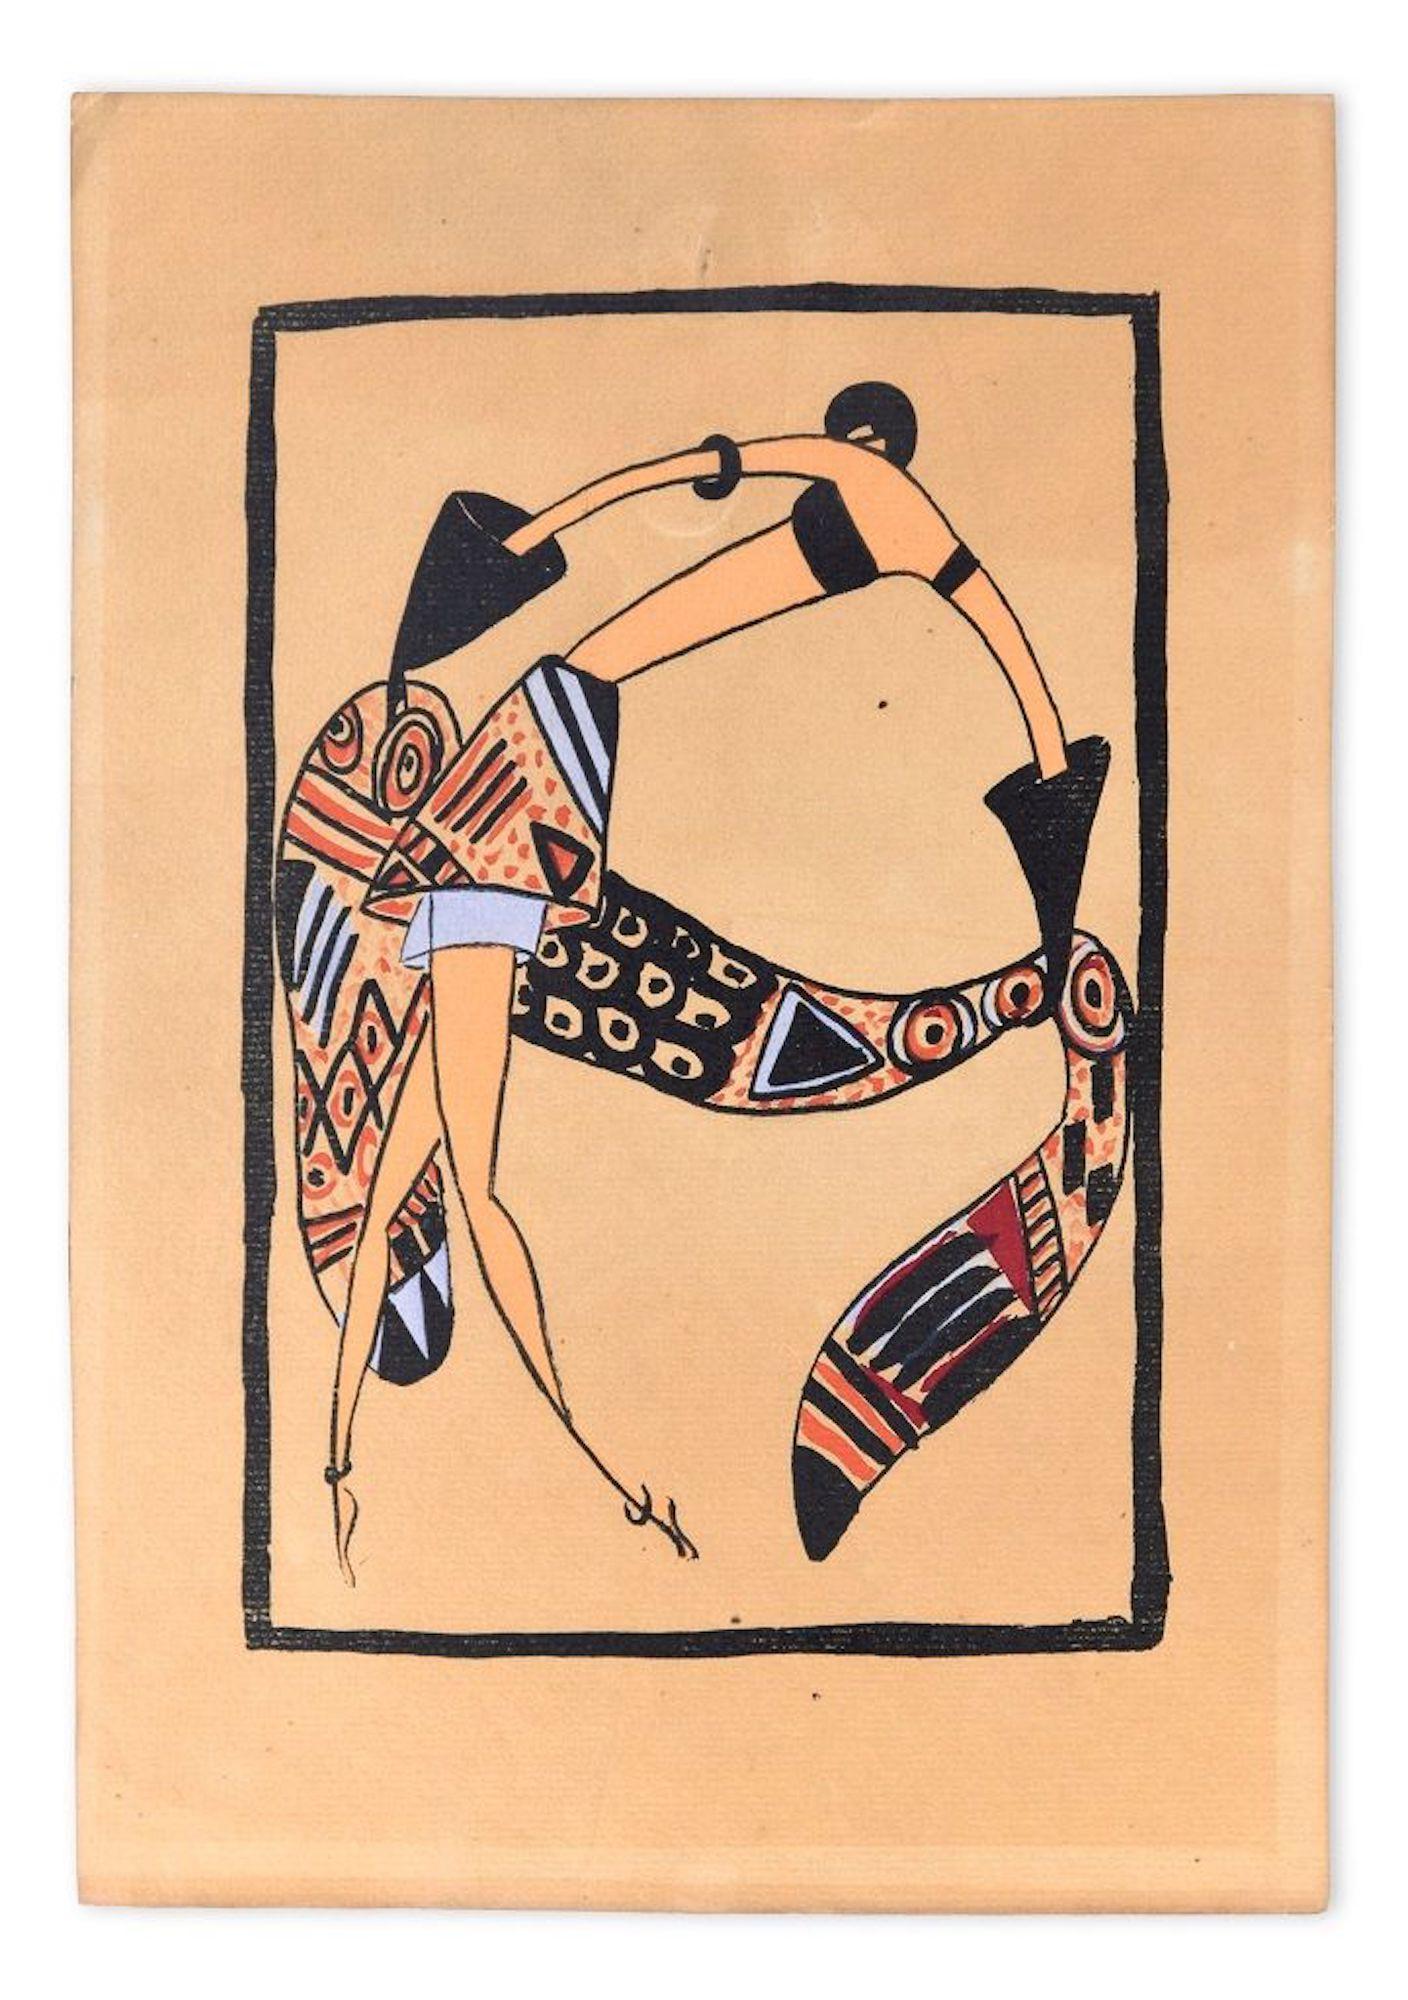 Unknown Figurative Print - Trial Cloth / Woodcut Hand Colored in Tempera on Paper - Art Deco - 1920s